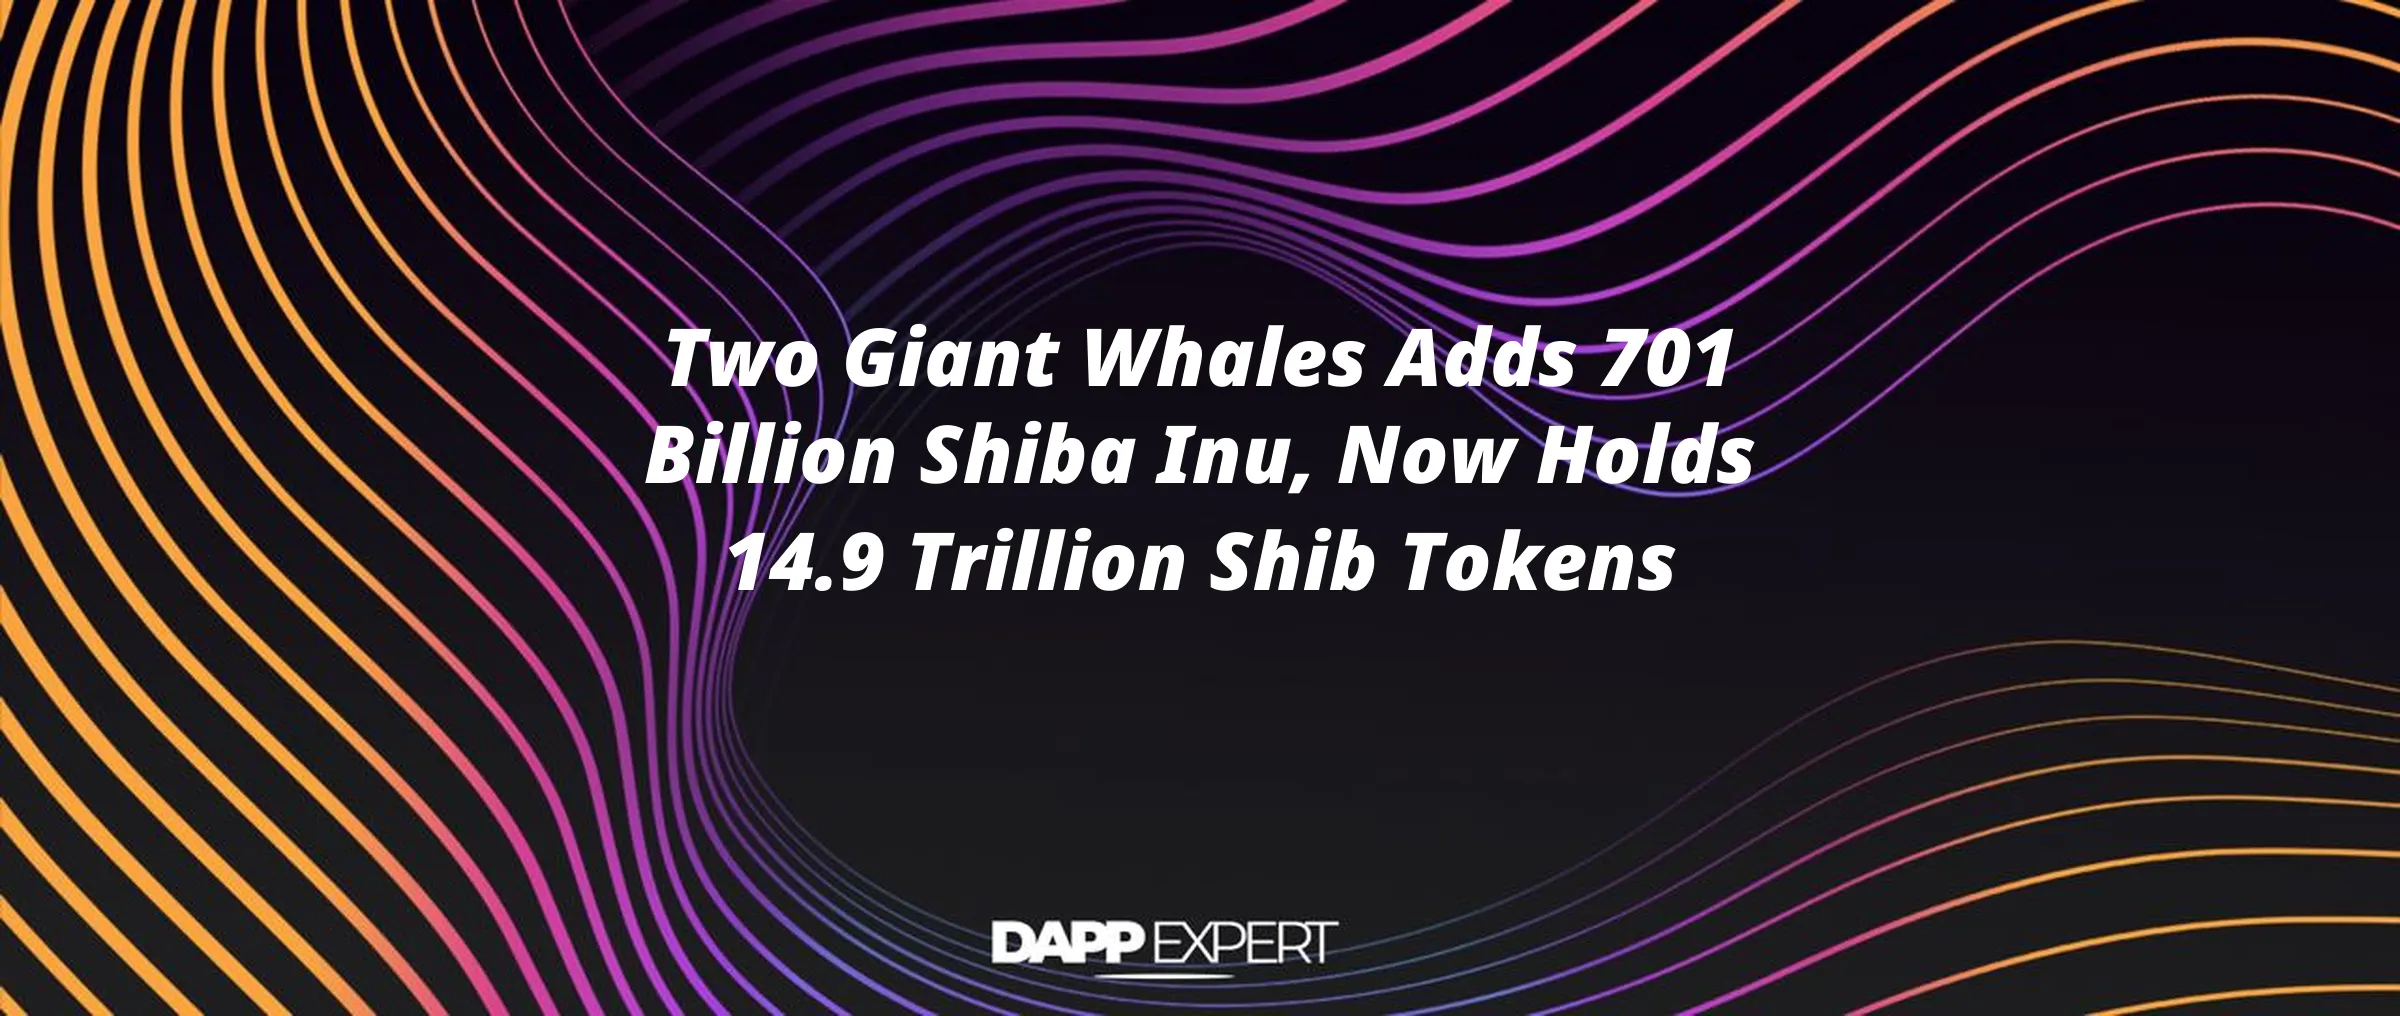 Two Giant Whales Adds 701 Billion Shiba Inu, Now Holds 14.9 Trillion Shib Tokens